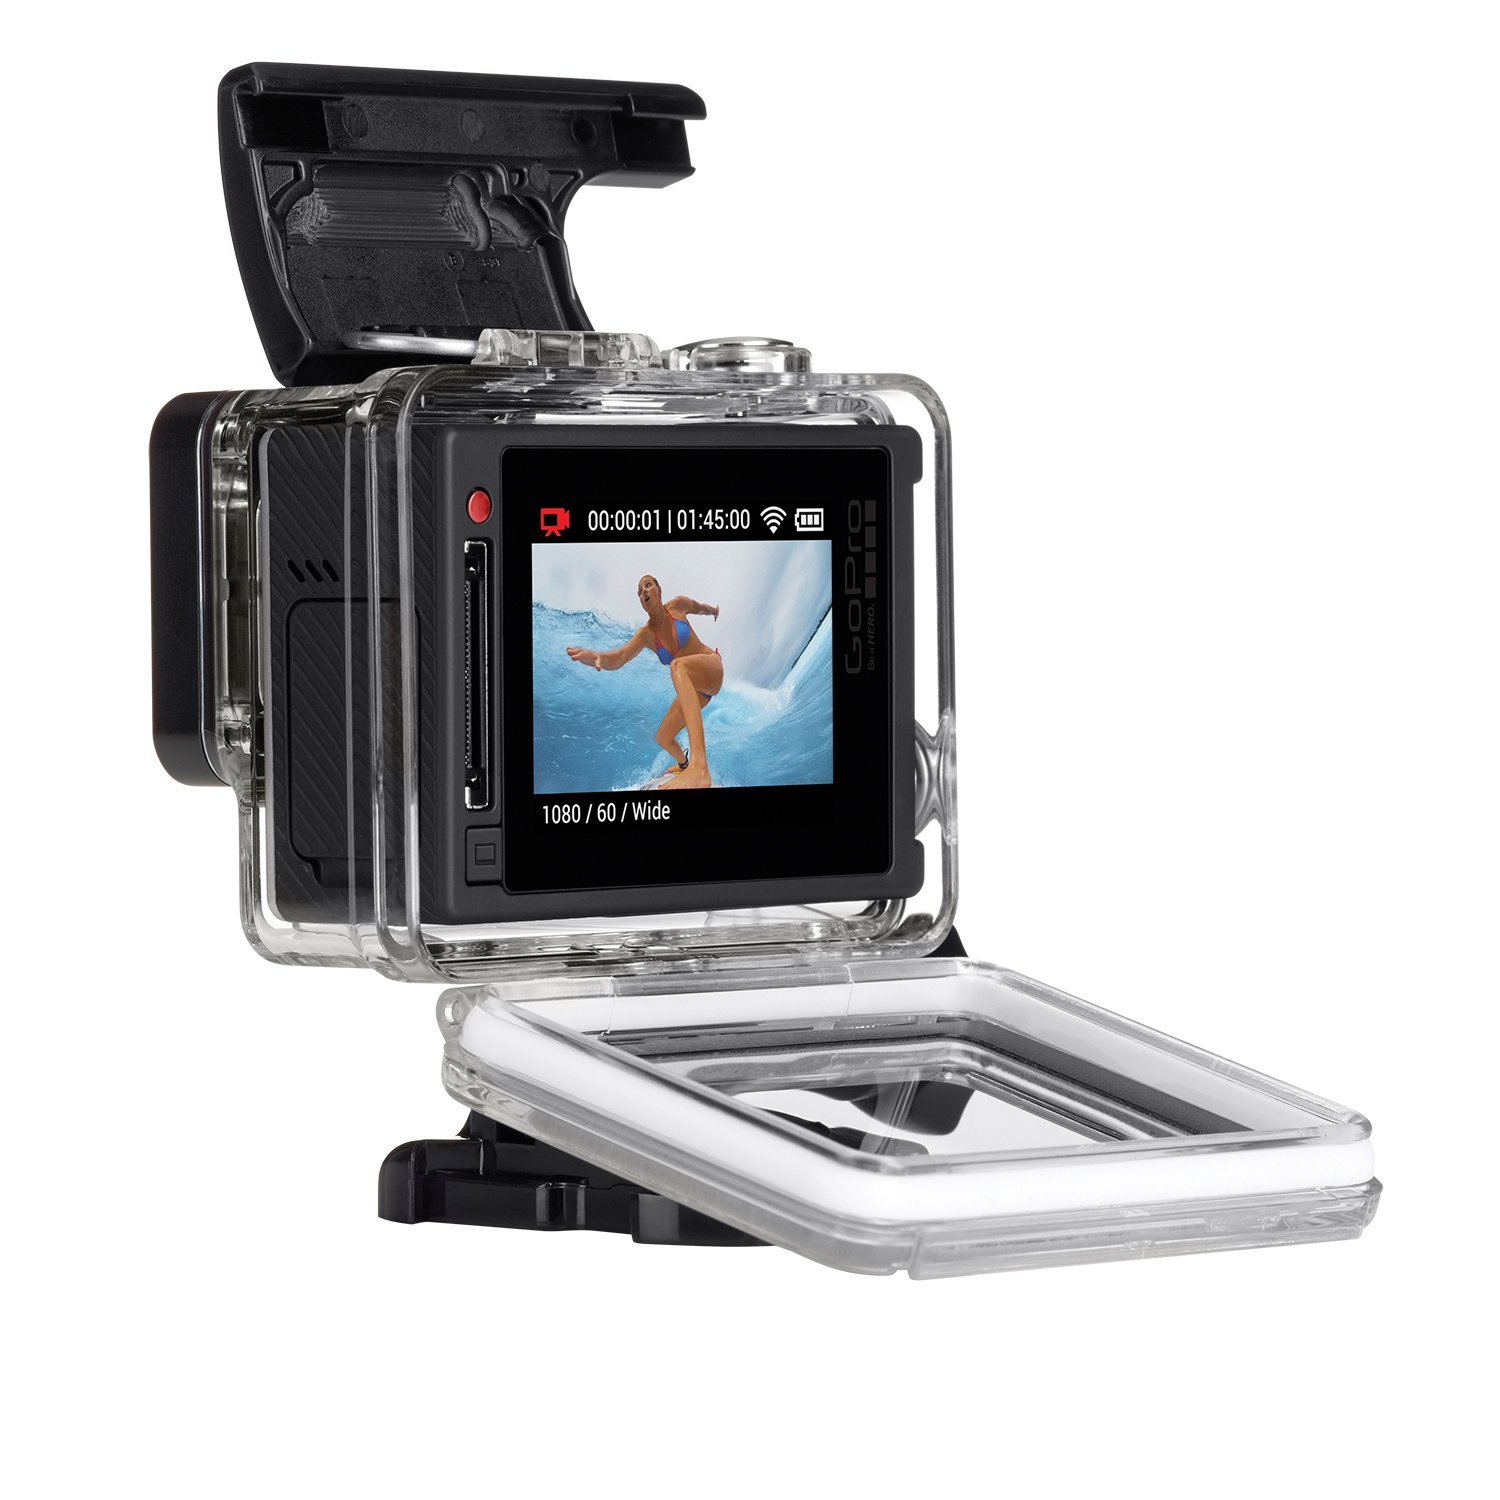 GoPro HERO4 Silver Review and price